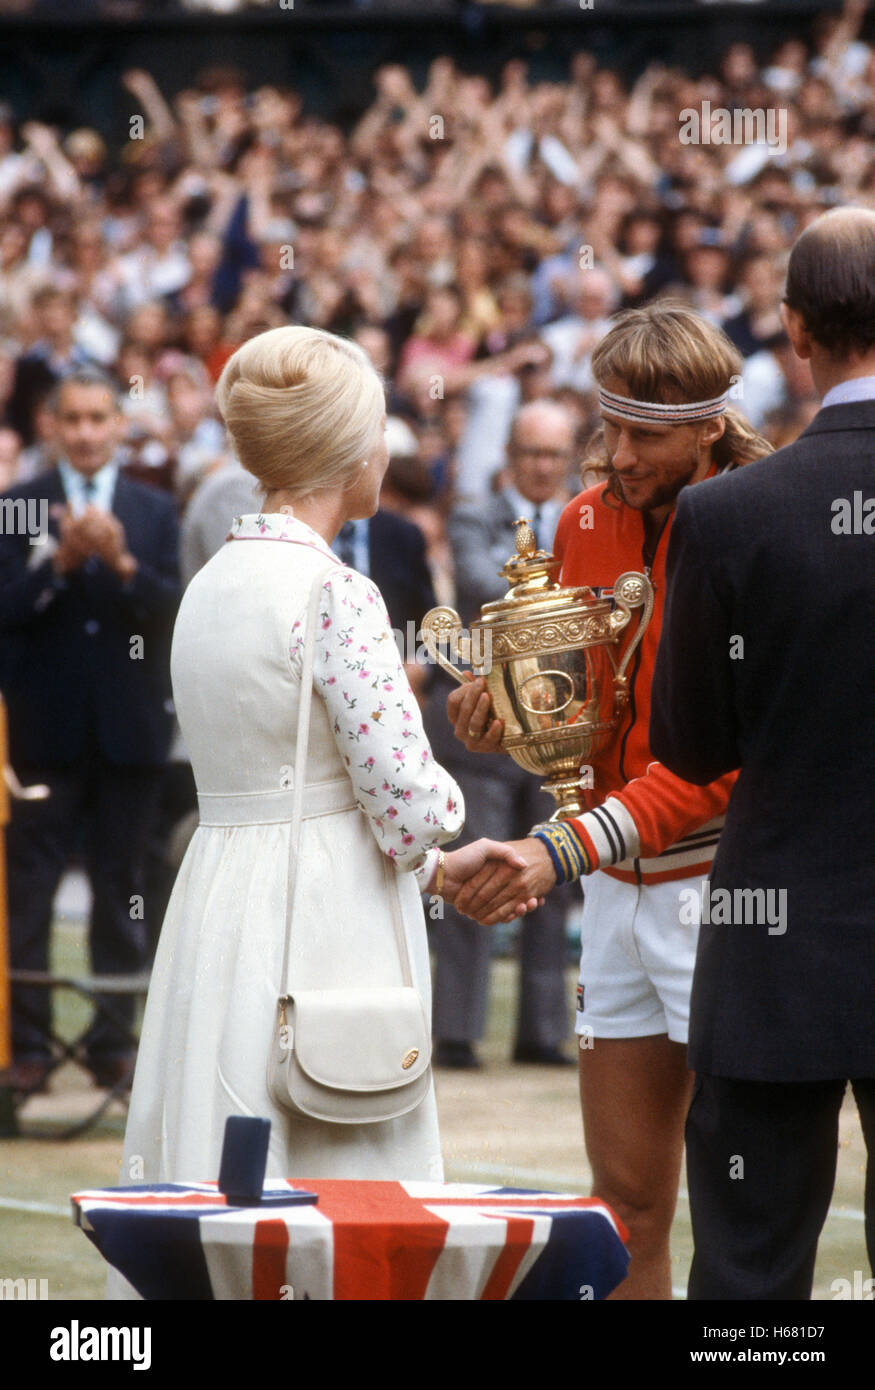 Bjorn Borg receiving his fifth Wimbledon trophy after defeating John McEnroe in the 1980 final. Stock Photo